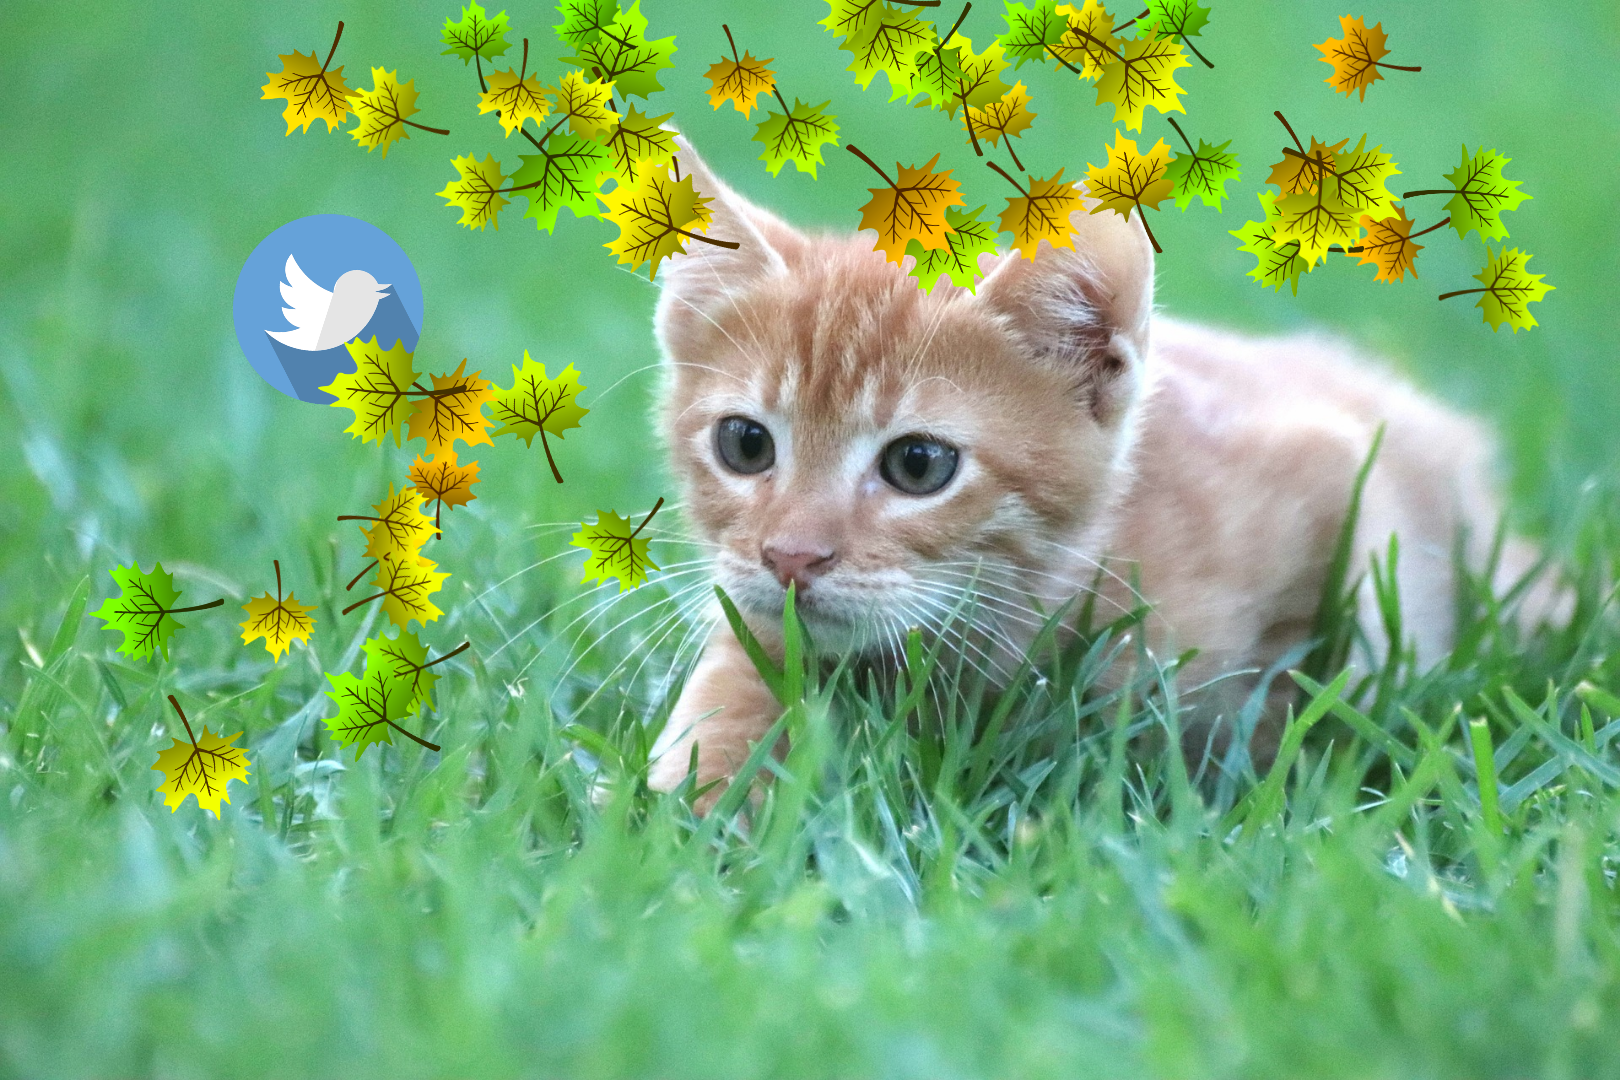 Cat chasing Twitter icon amongst grass and autumn leaves 